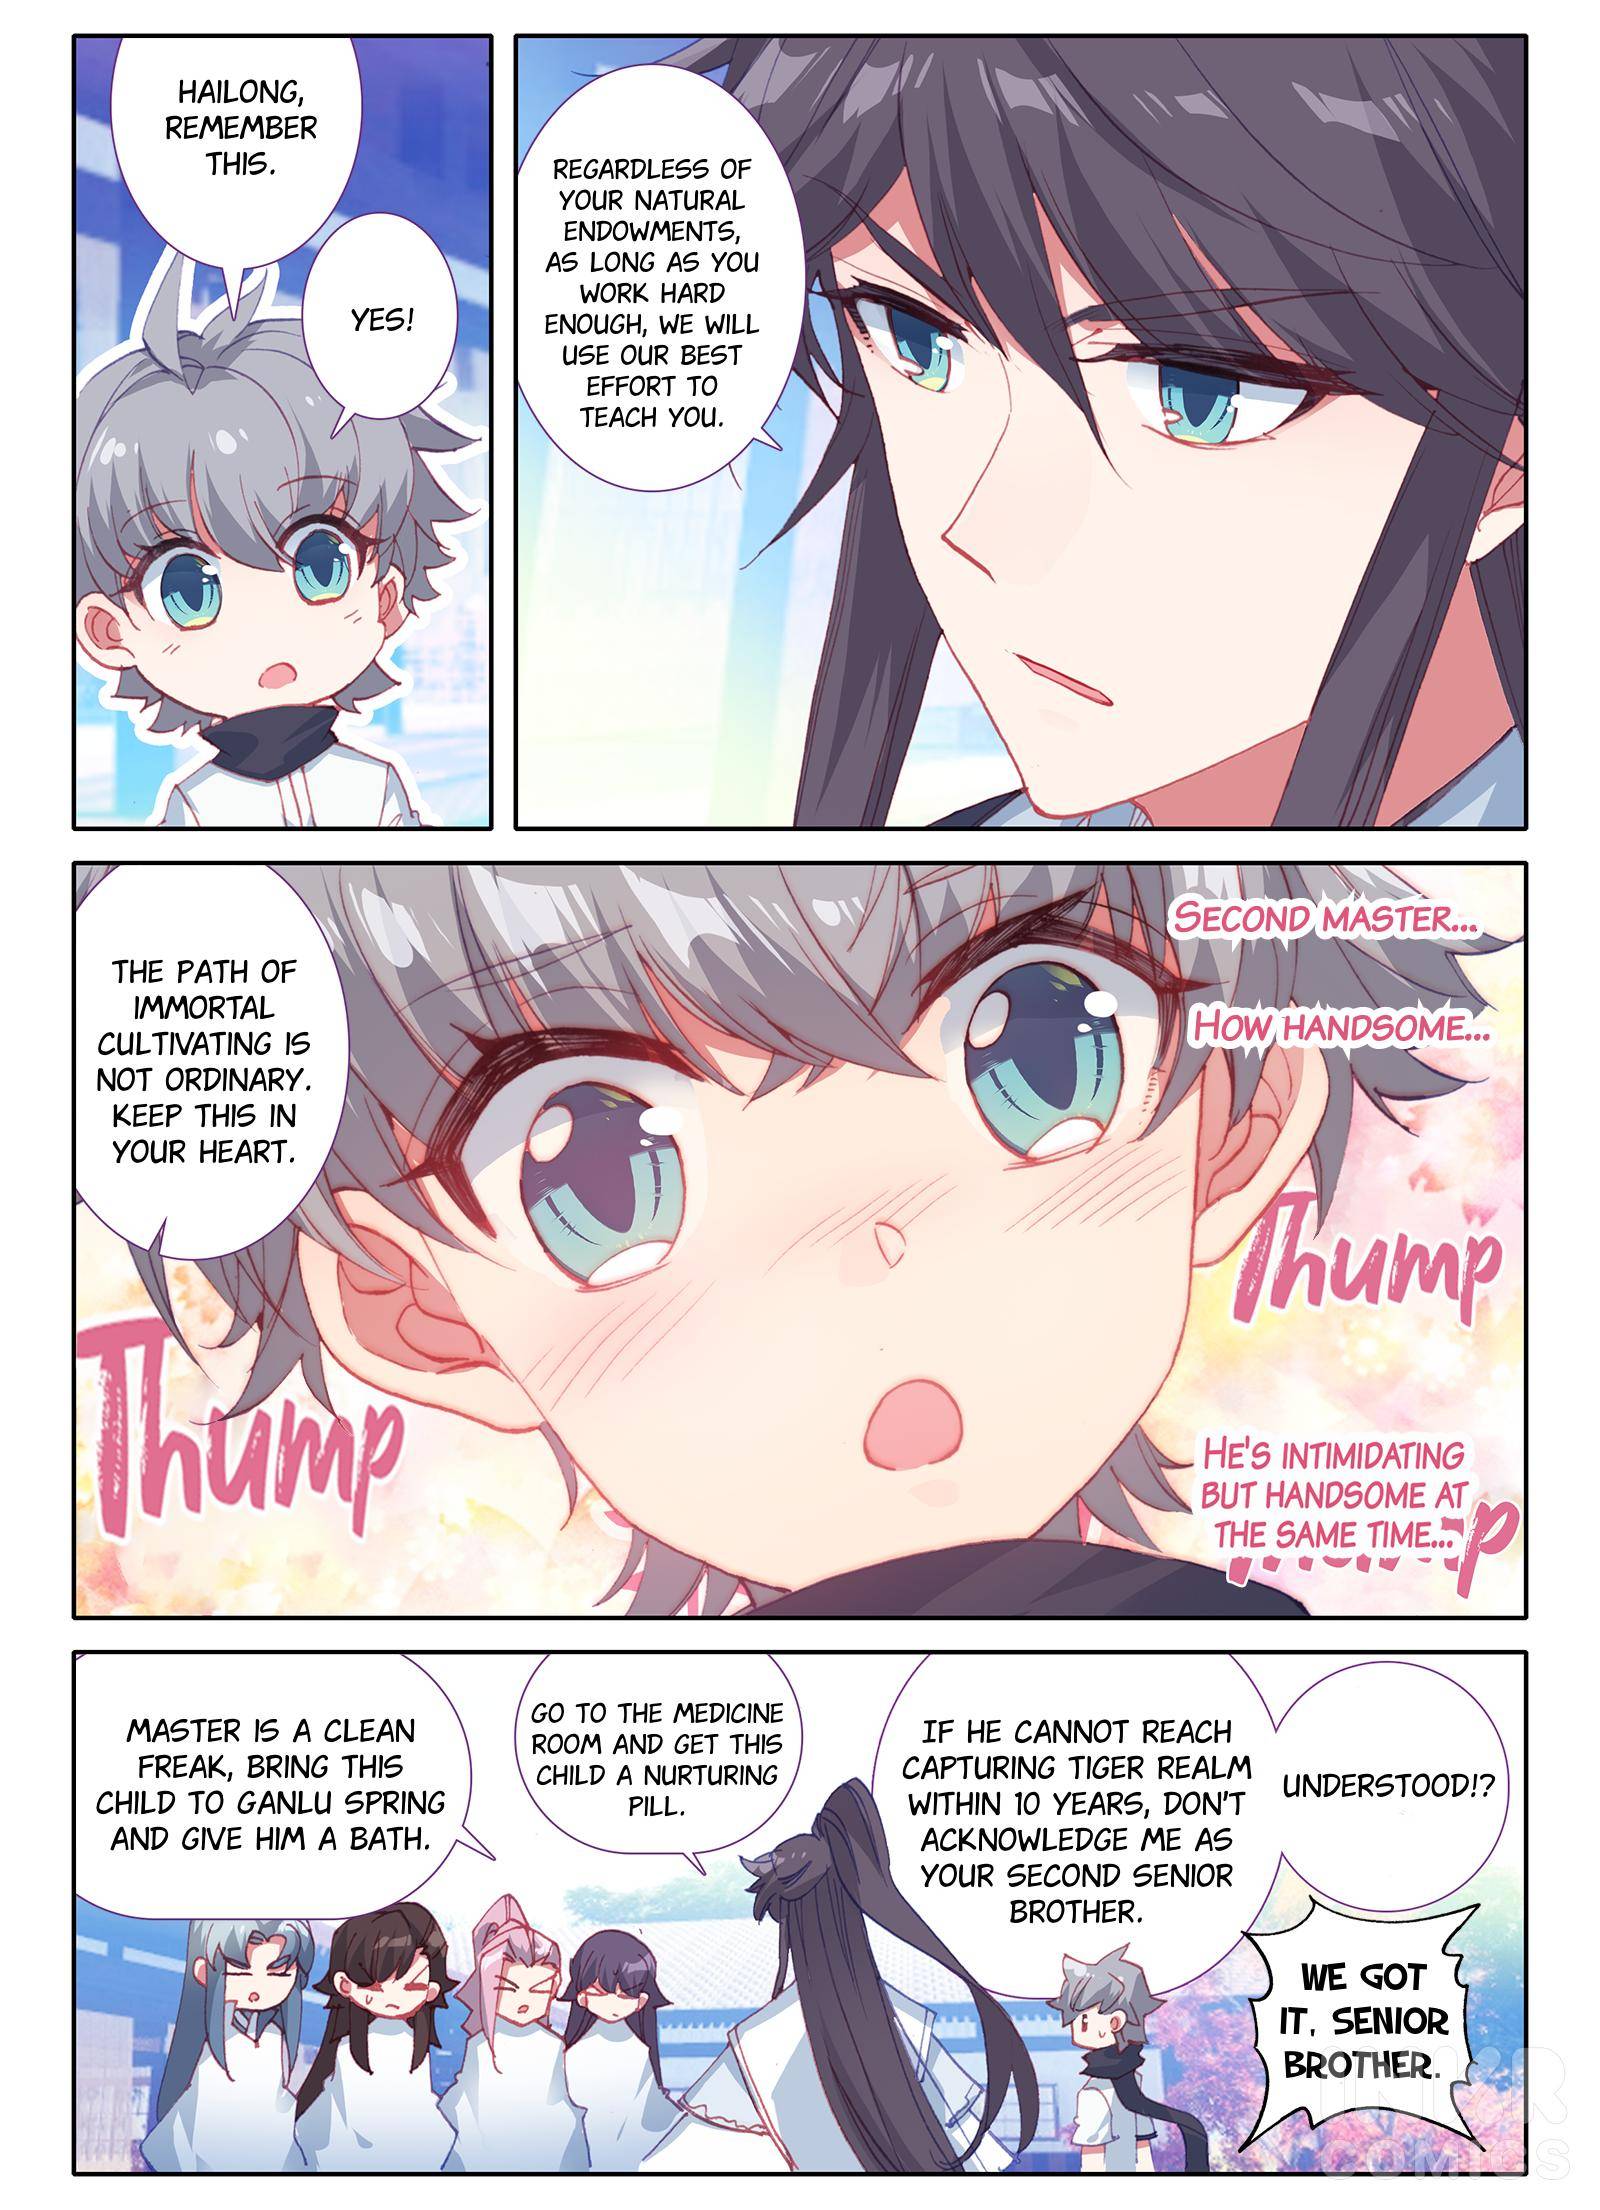 Only I Shall Be Immortal - chapter 5 - #6